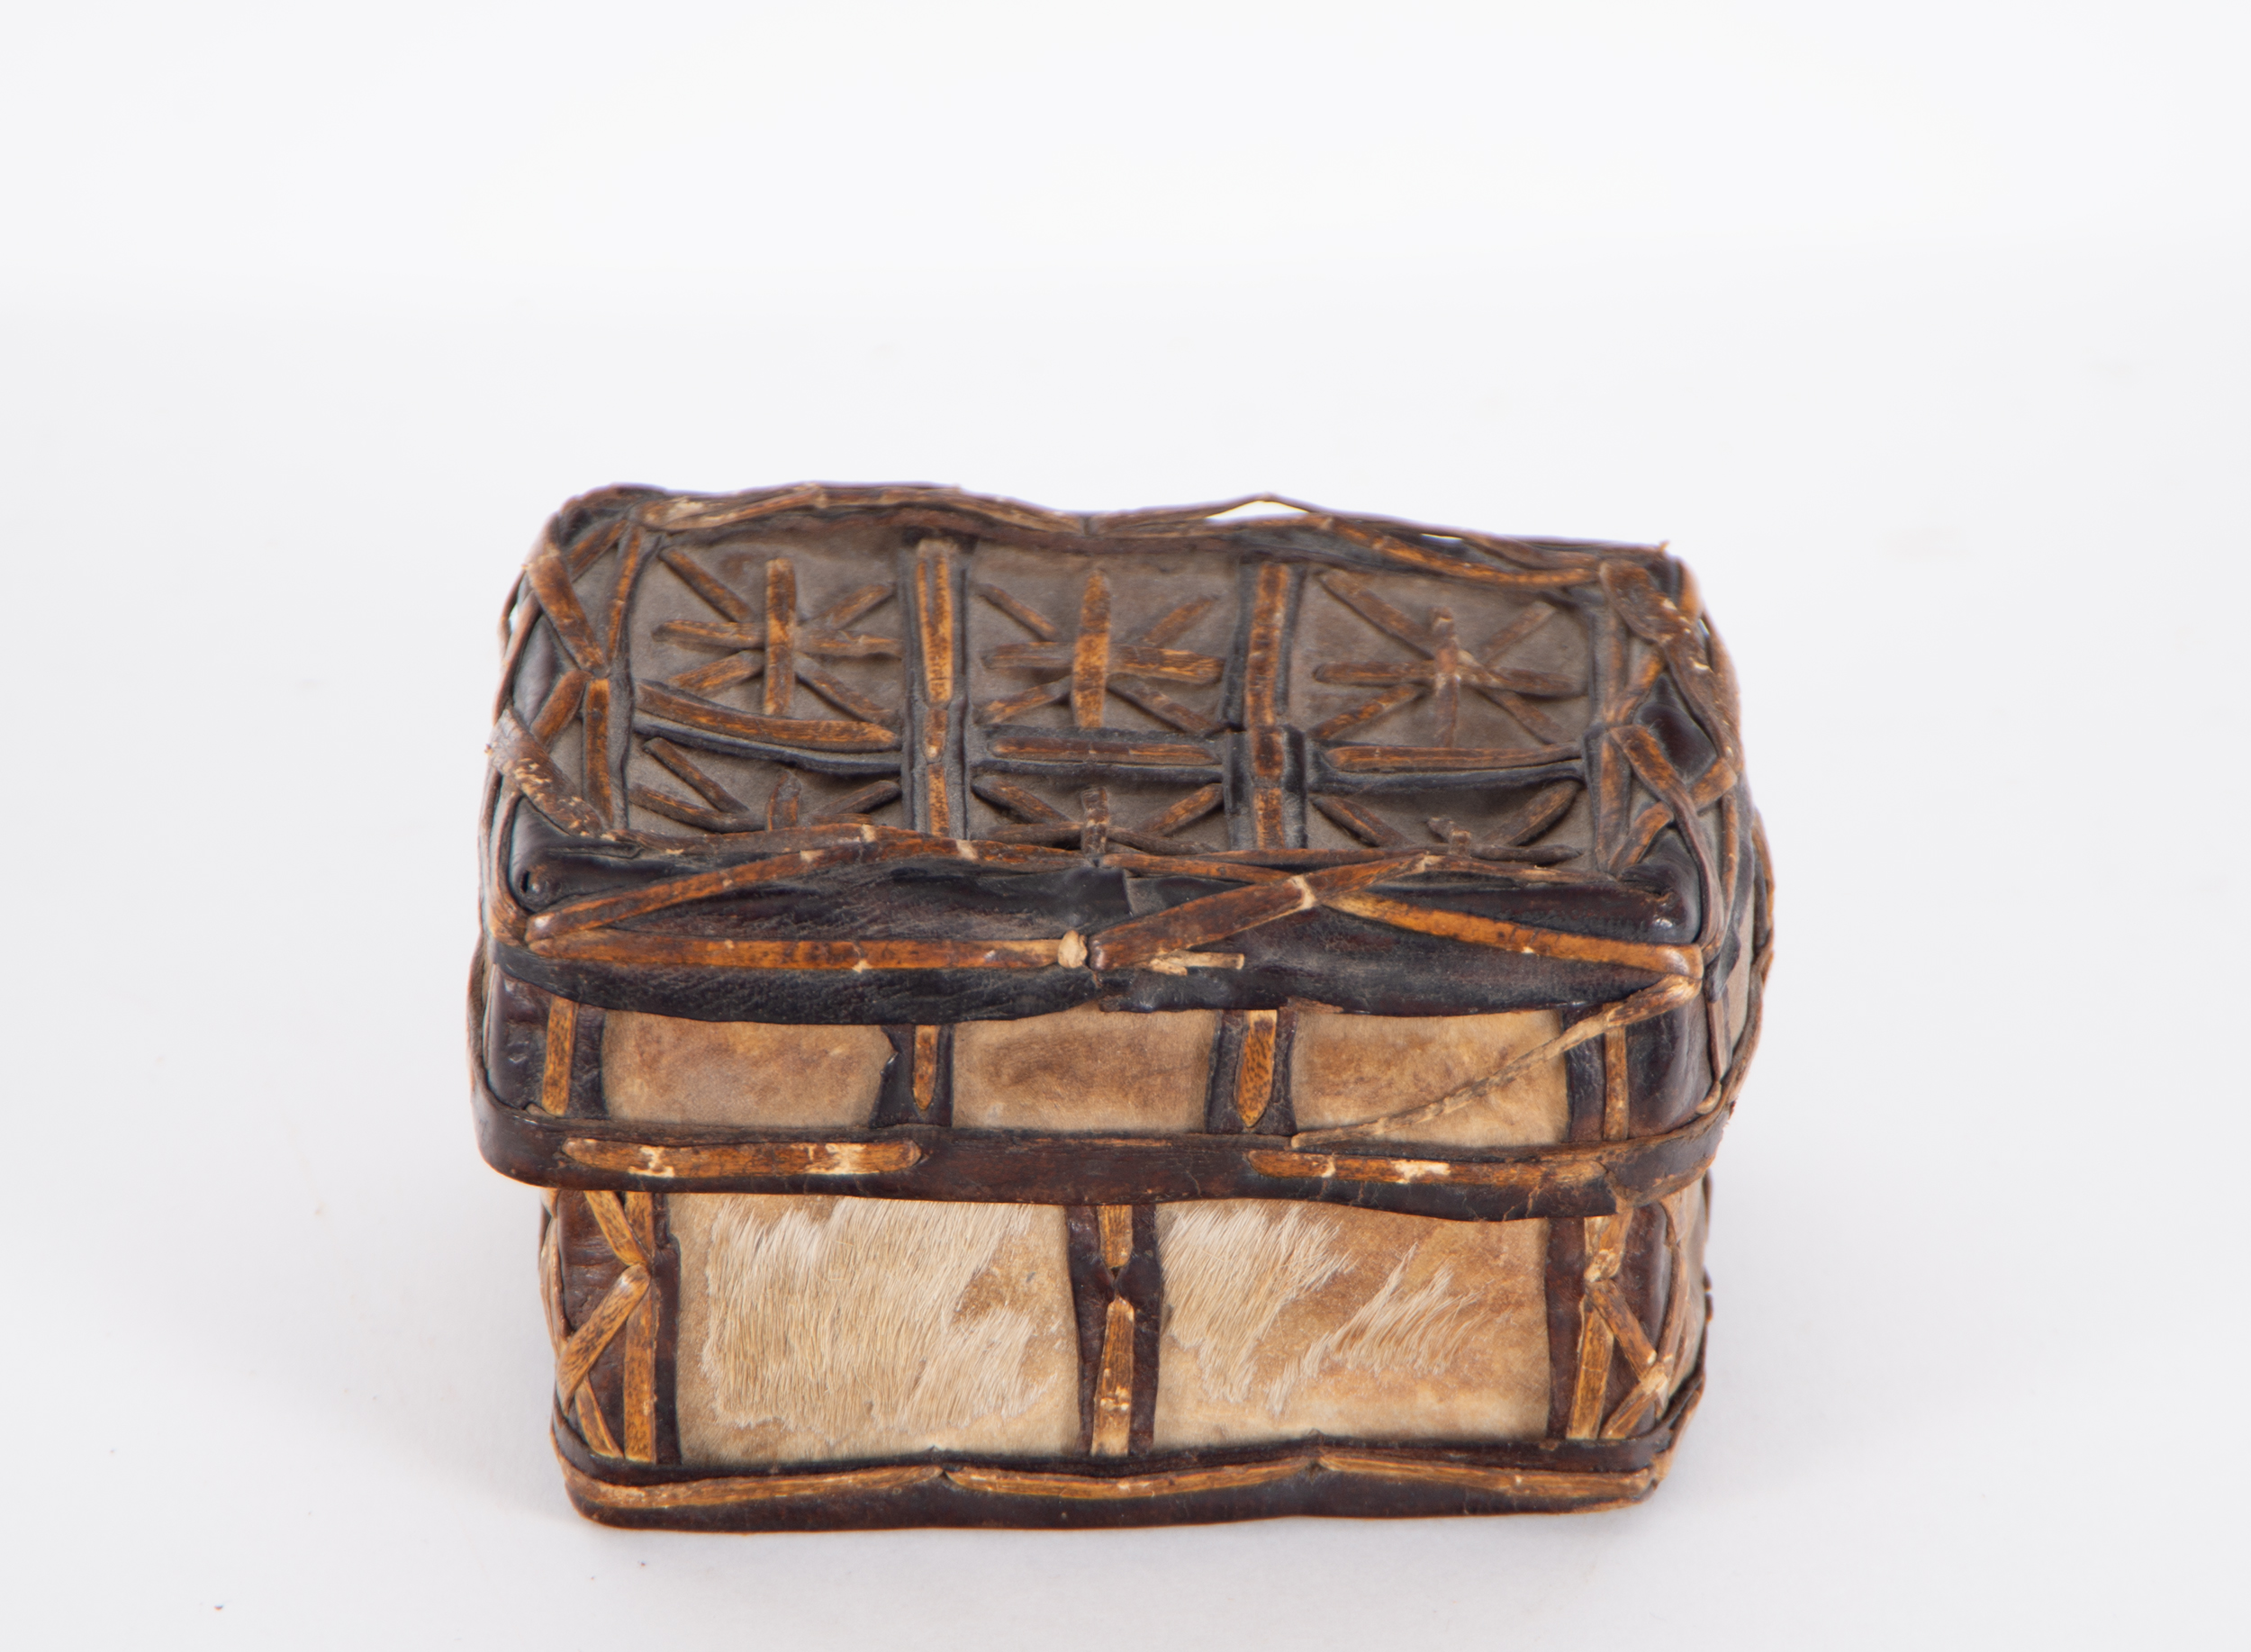 Small Mexican leather chest, 17th century